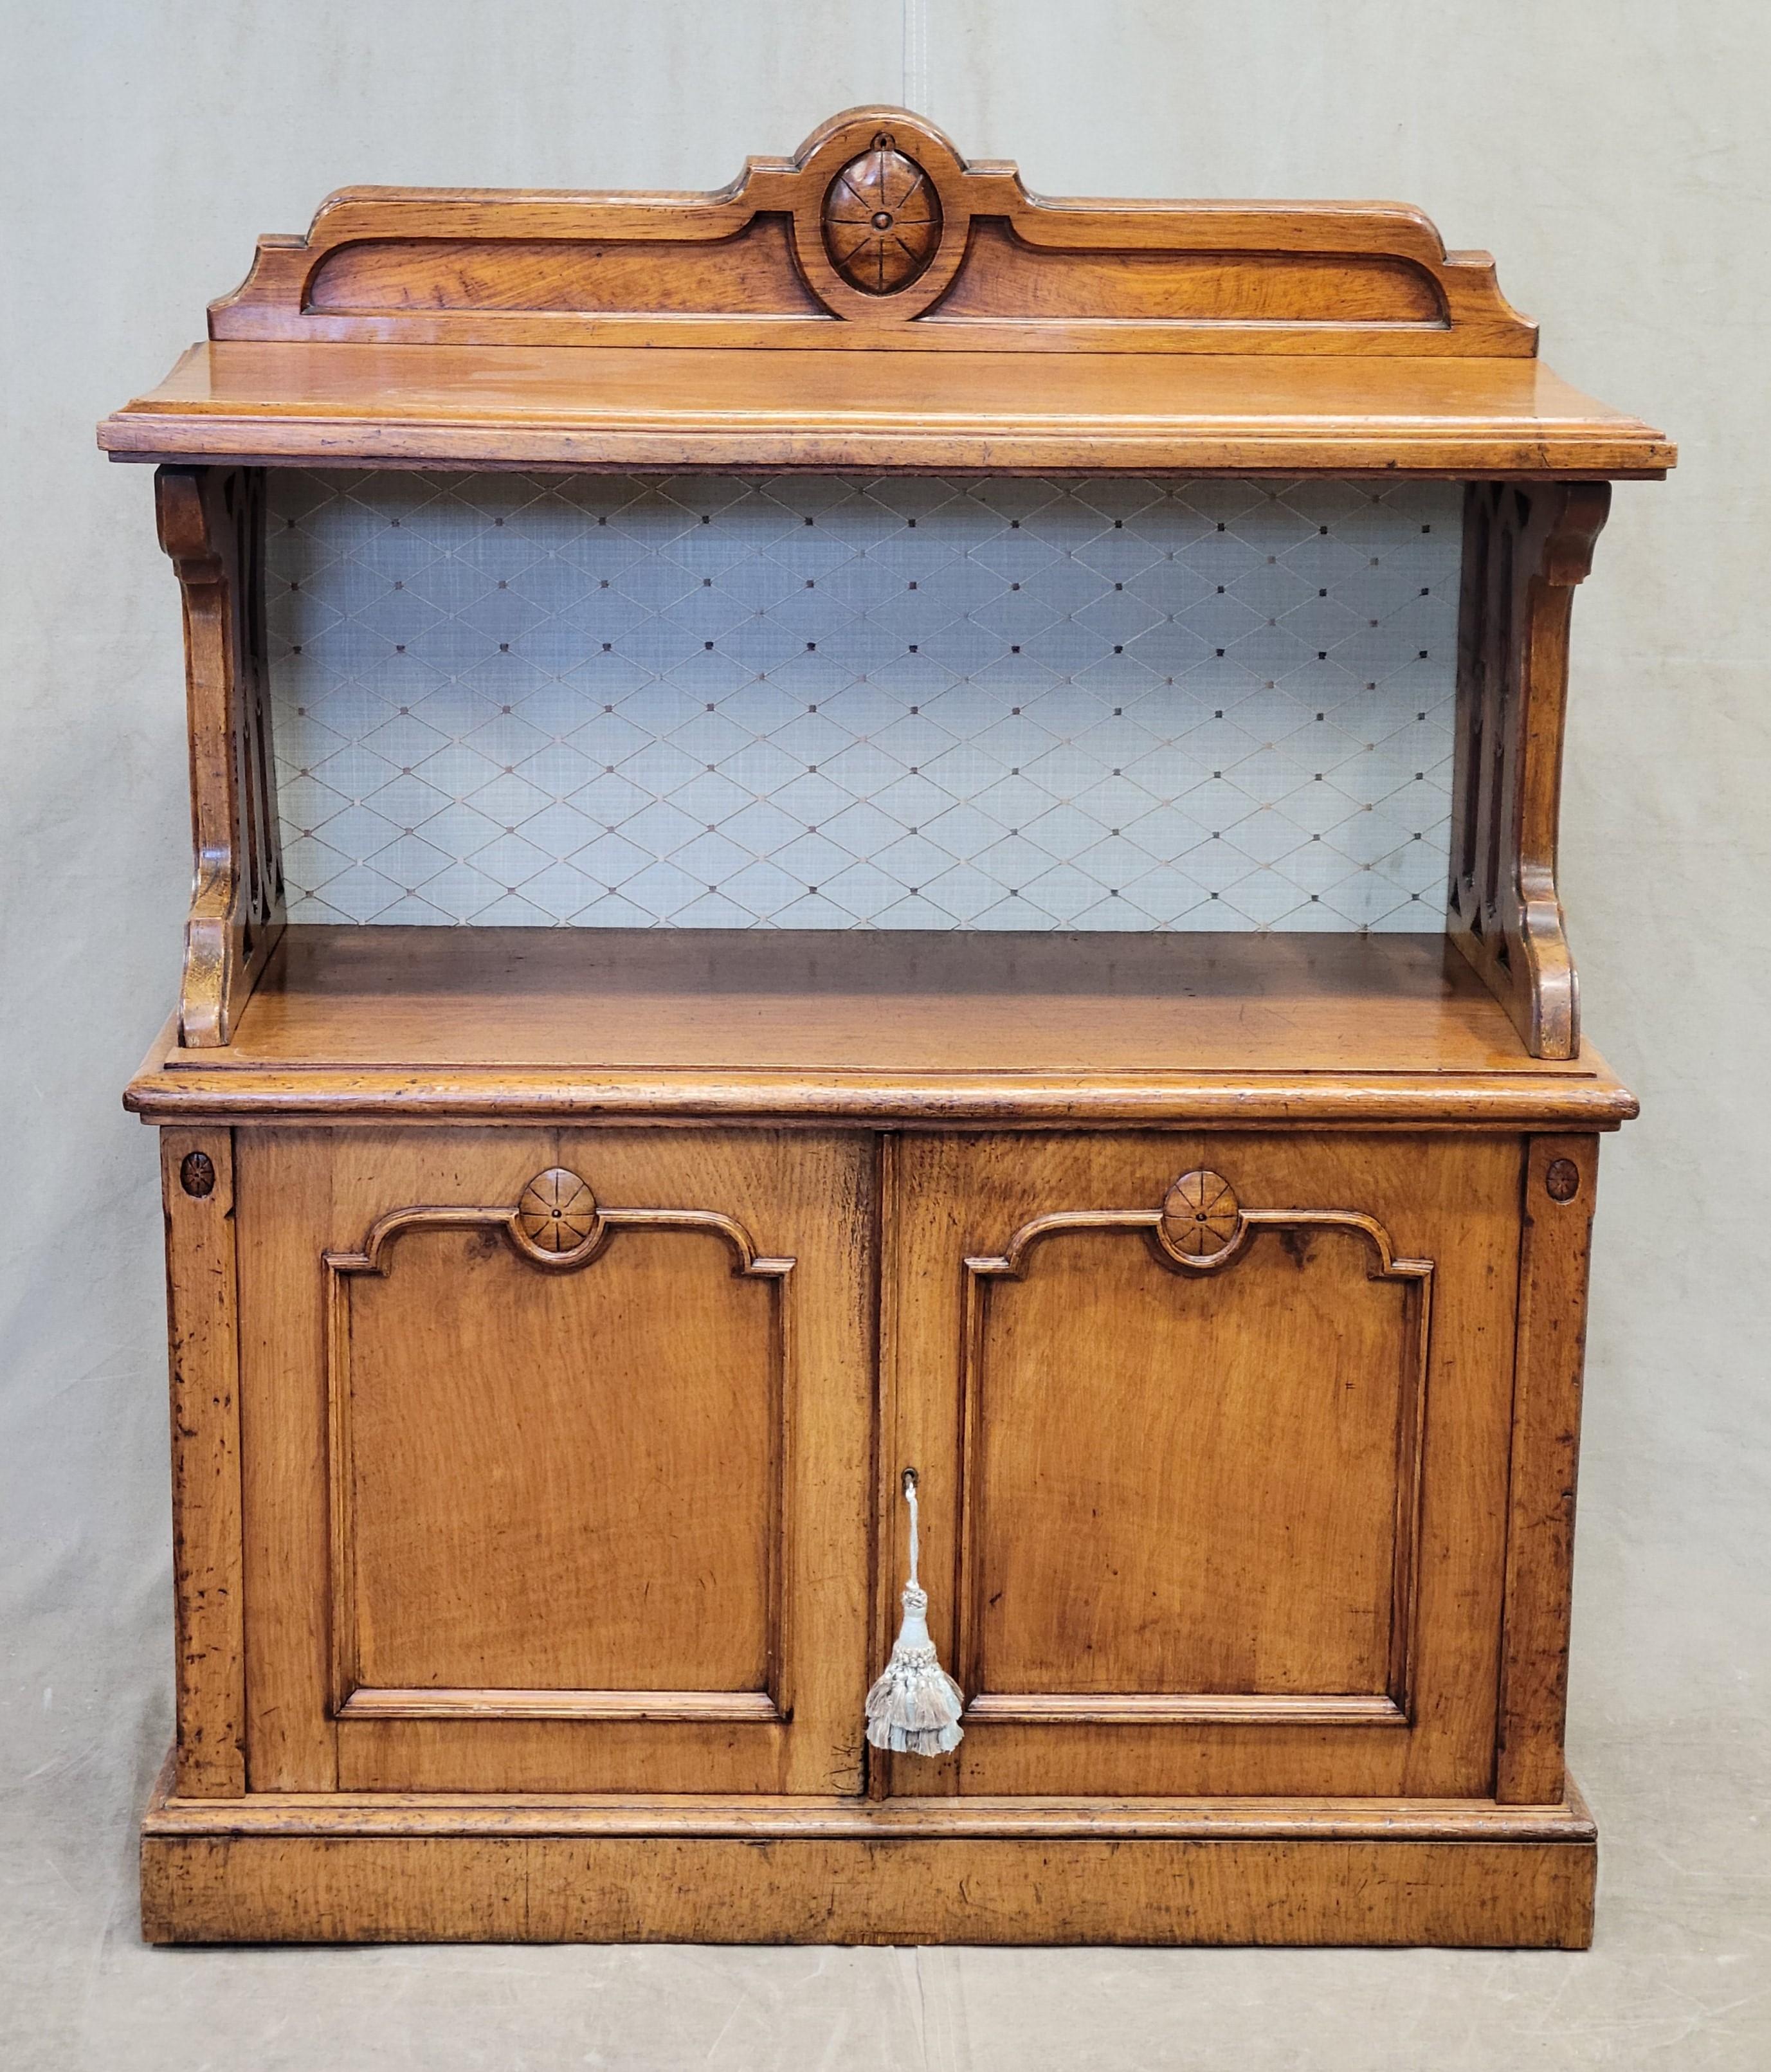 A beautiful antique English or Scottish golden elm server or bar with hand carved elements and a muted blue green diamond pattern fabric back panel. The old elm wood has gorgeous graining and just glows! Hand carved in the latter part of the 1800s